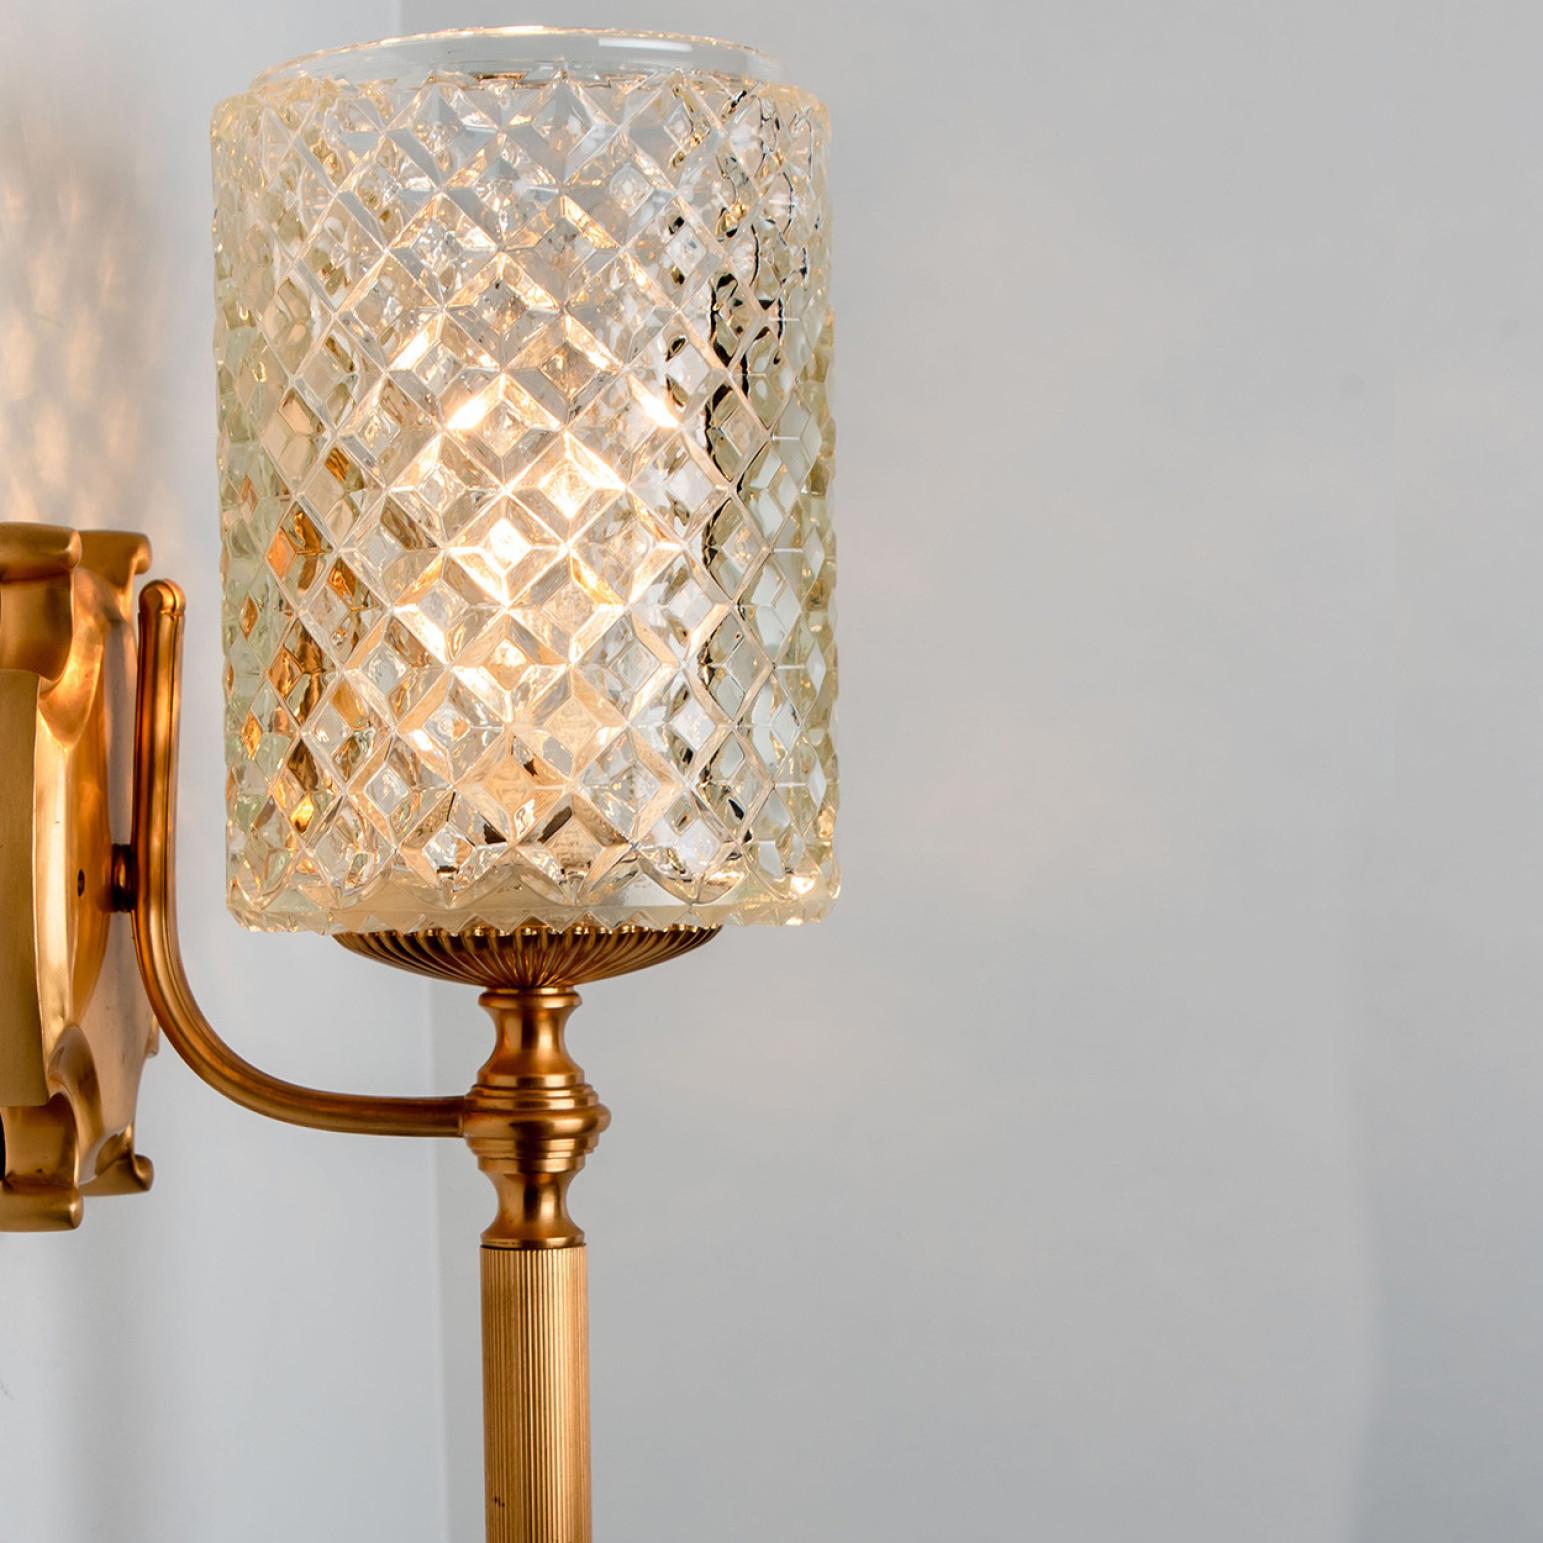 Textured Glass and Brass Wall Lights, Germany, 1960s For Sale 8